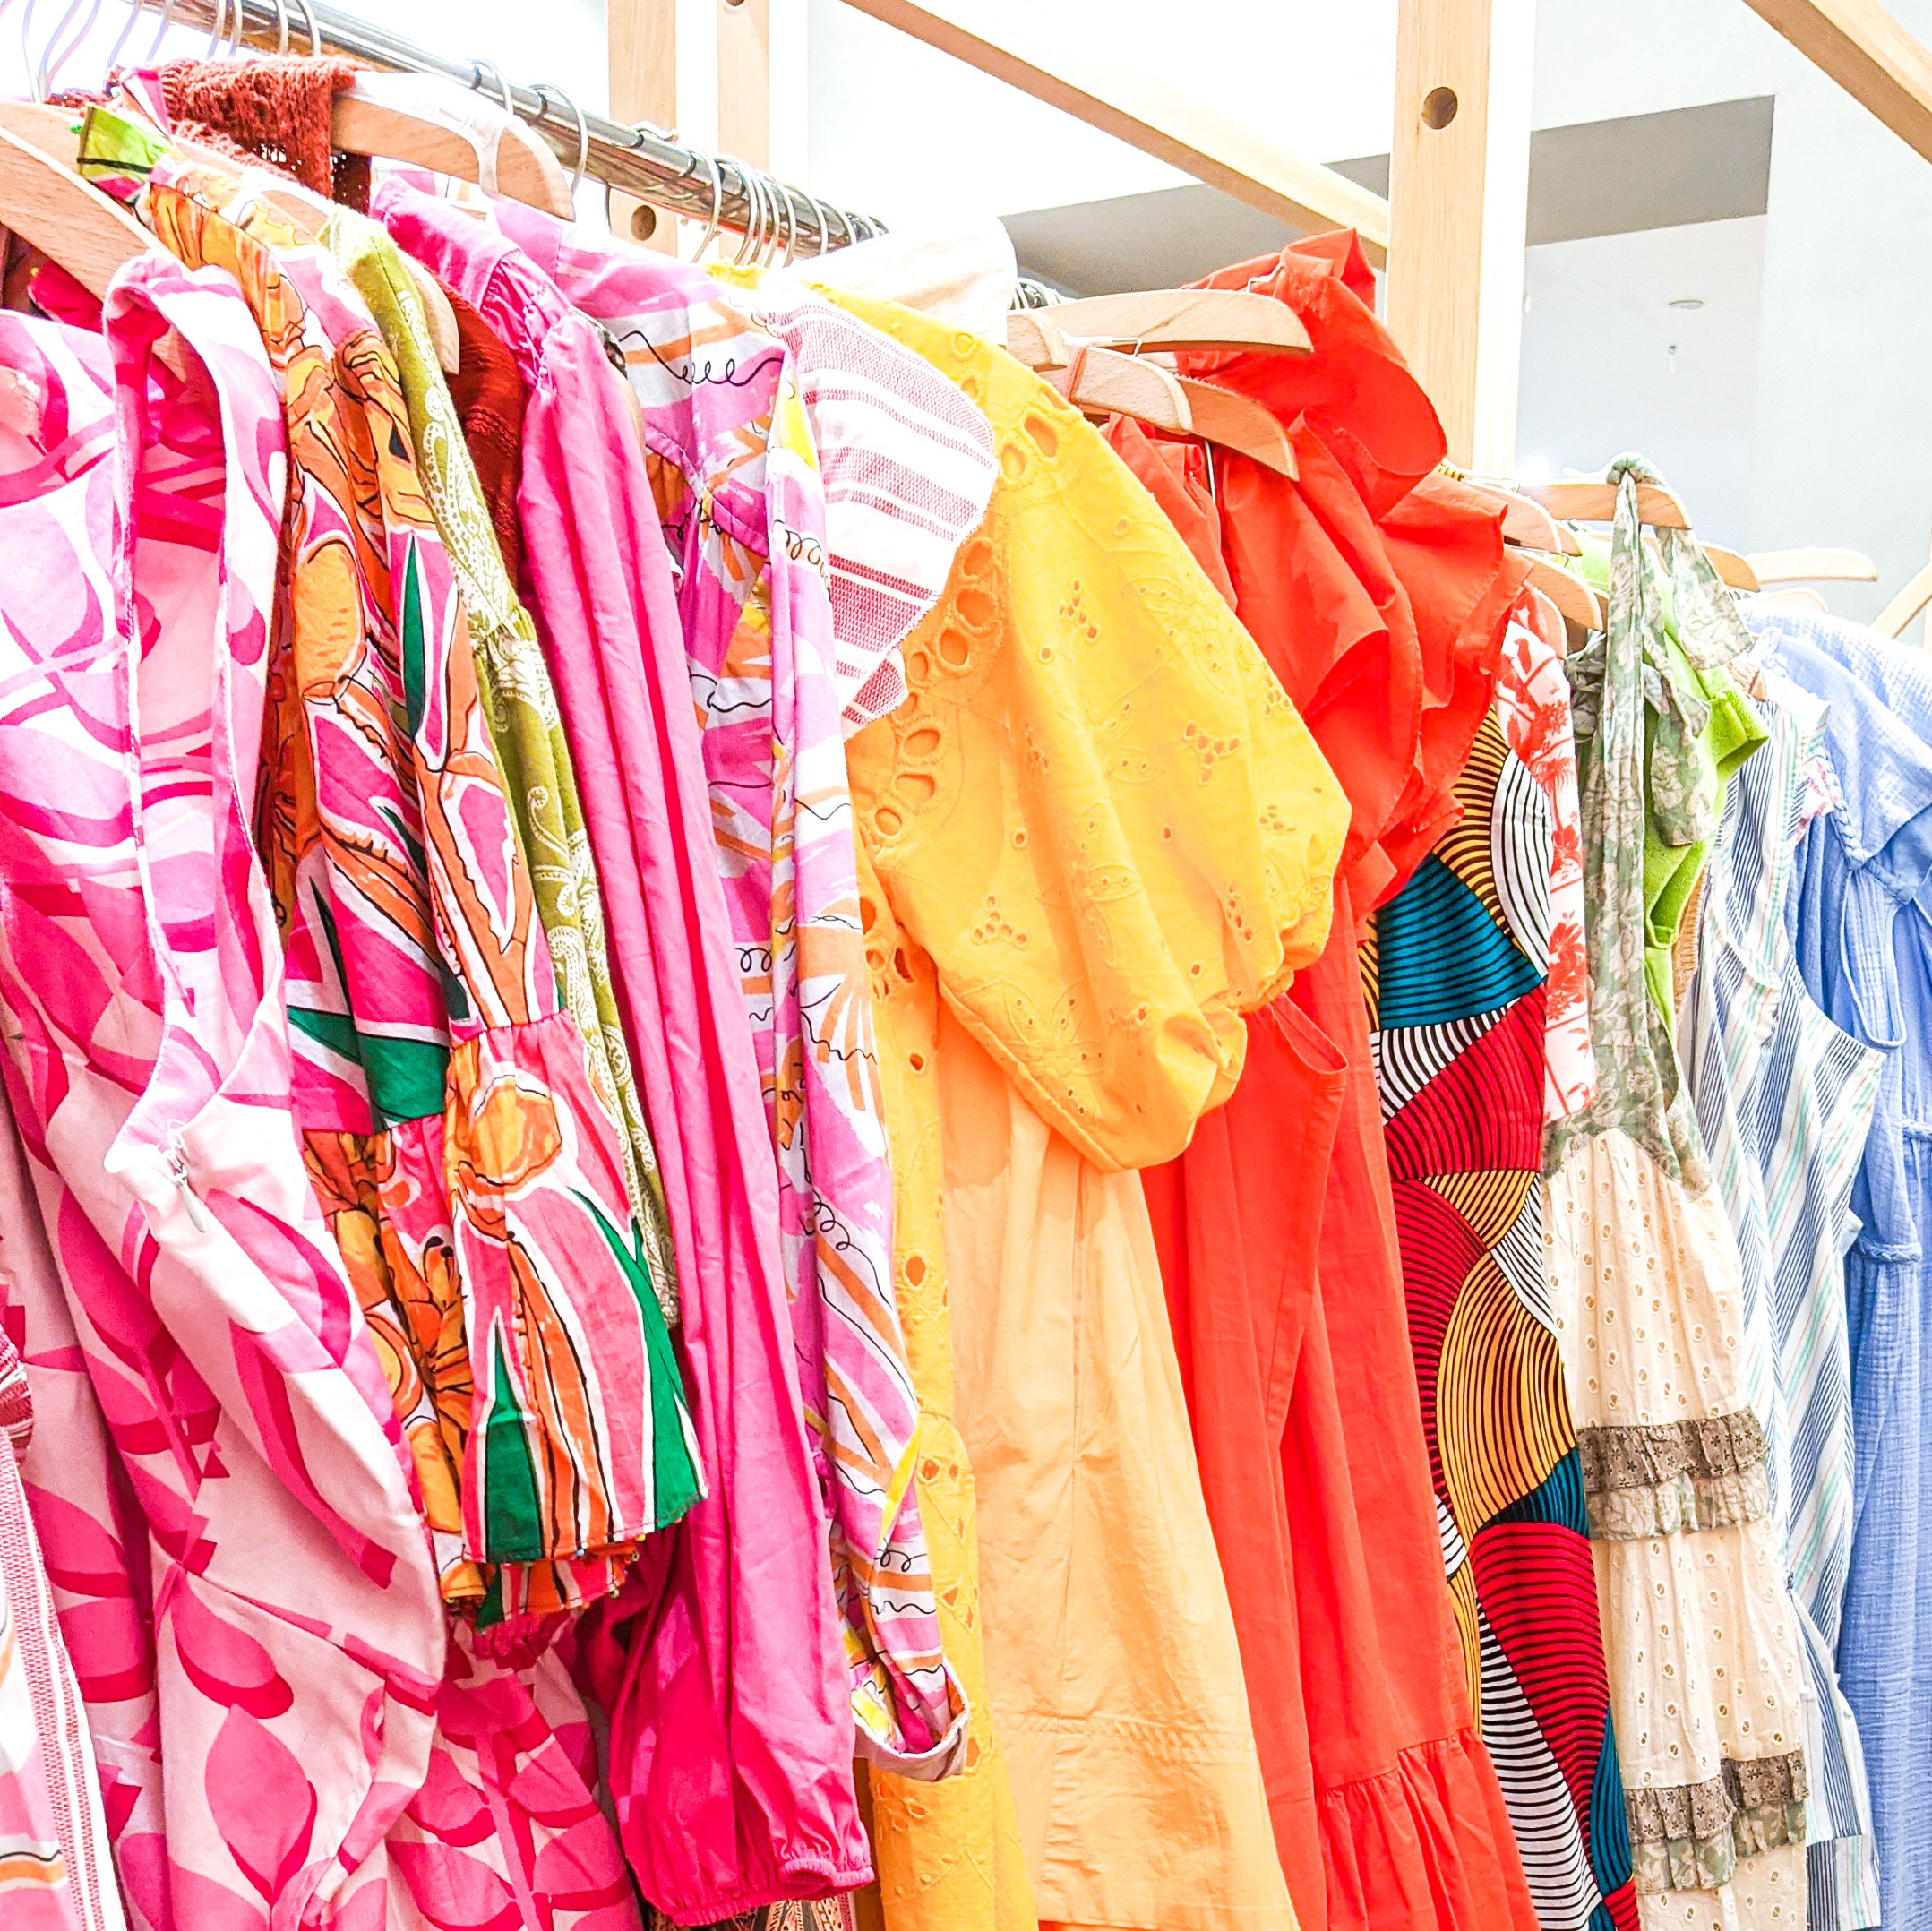 Row of colorful dresses in Anthropologie sales room